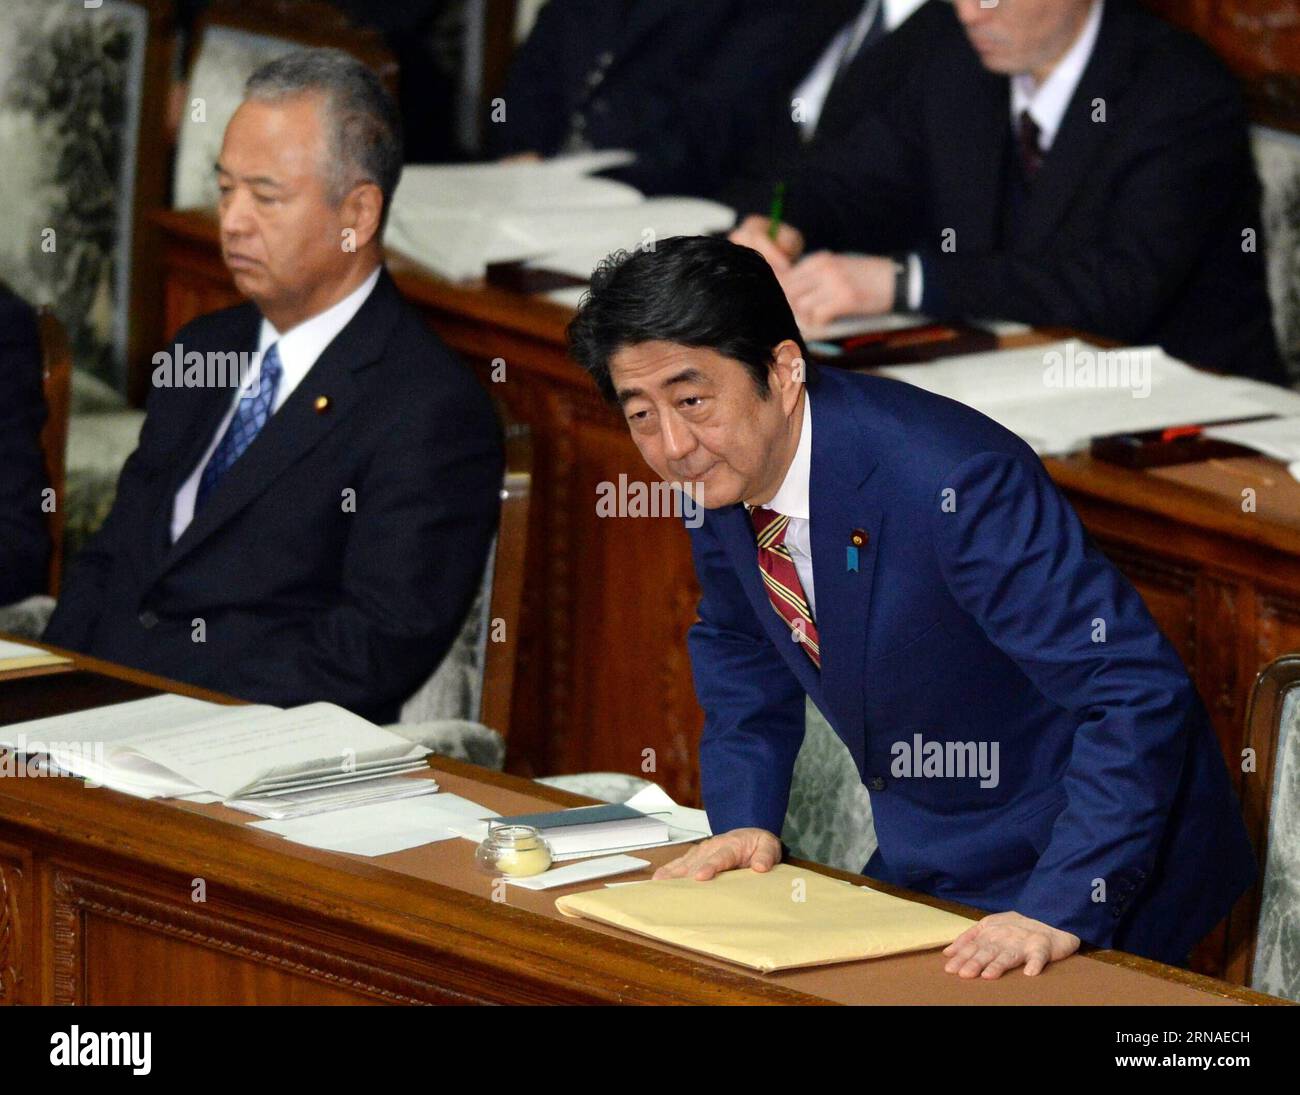 (160122) -- TOKYO, Jan. 22, 2016 -- Japanese Prime Minister Shinzo Abe (R) attend a session of the House of Representatives in Tokyo, Japan, on Jan. 22, 2016. Japanese Prime Minister Shinzo Abe sought to gain more votes from lower income class for the upcoming upper house election by vowing to address wage gaps in his policy speech on Friday. ) JAPAN-TOKYO-ABE-POLICY SPEECH MaxPing PUBLICATIONxNOTxINxCHN   160122 Tokyo Jan 22 2016 Japanese Prime Ministers Shinzo ABE r attend a Session of The House of Representatives in Tokyo Japan ON Jan 22 2016 Japanese Prime Ministers Shinzo ABE sought to Ga Stock Photo